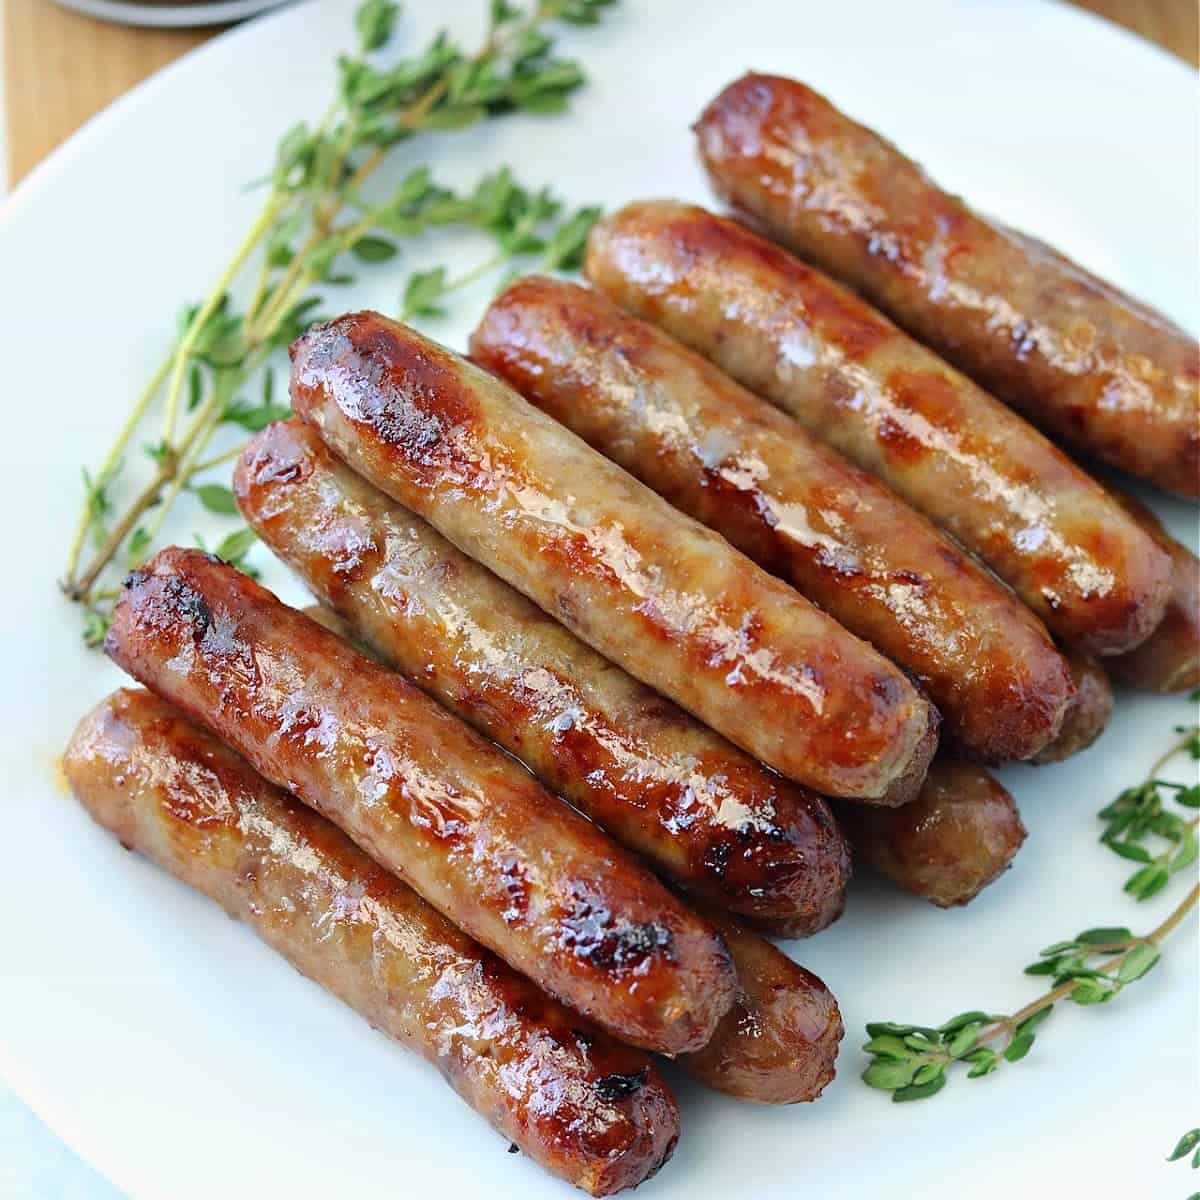 How To Cook Breakfast Sausages